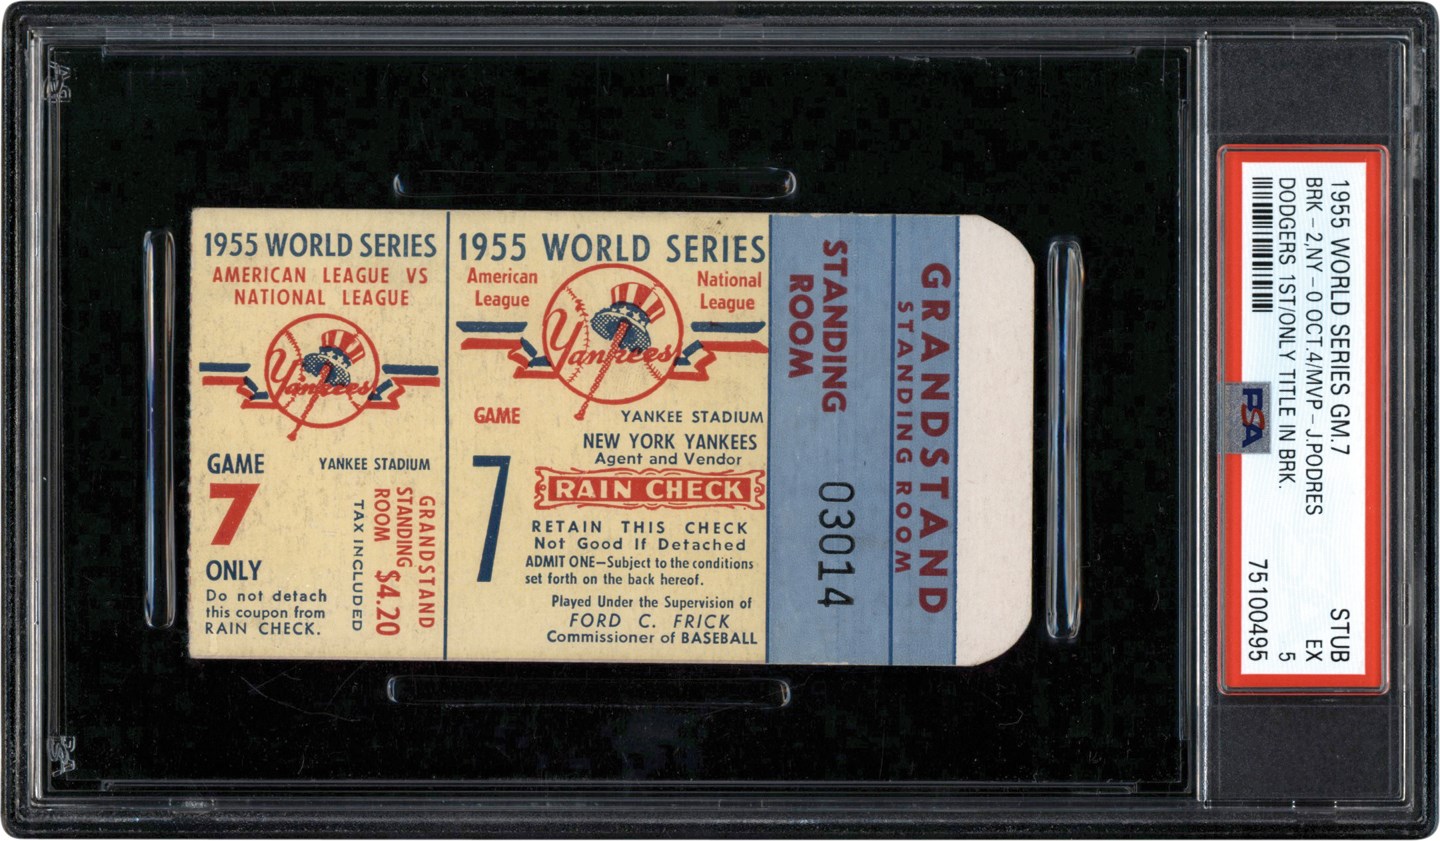 - 1955 World Series Game 7 Ticket Stub PSA EX 5 (Pop 1 of 4 - Only Two Graded Higher)